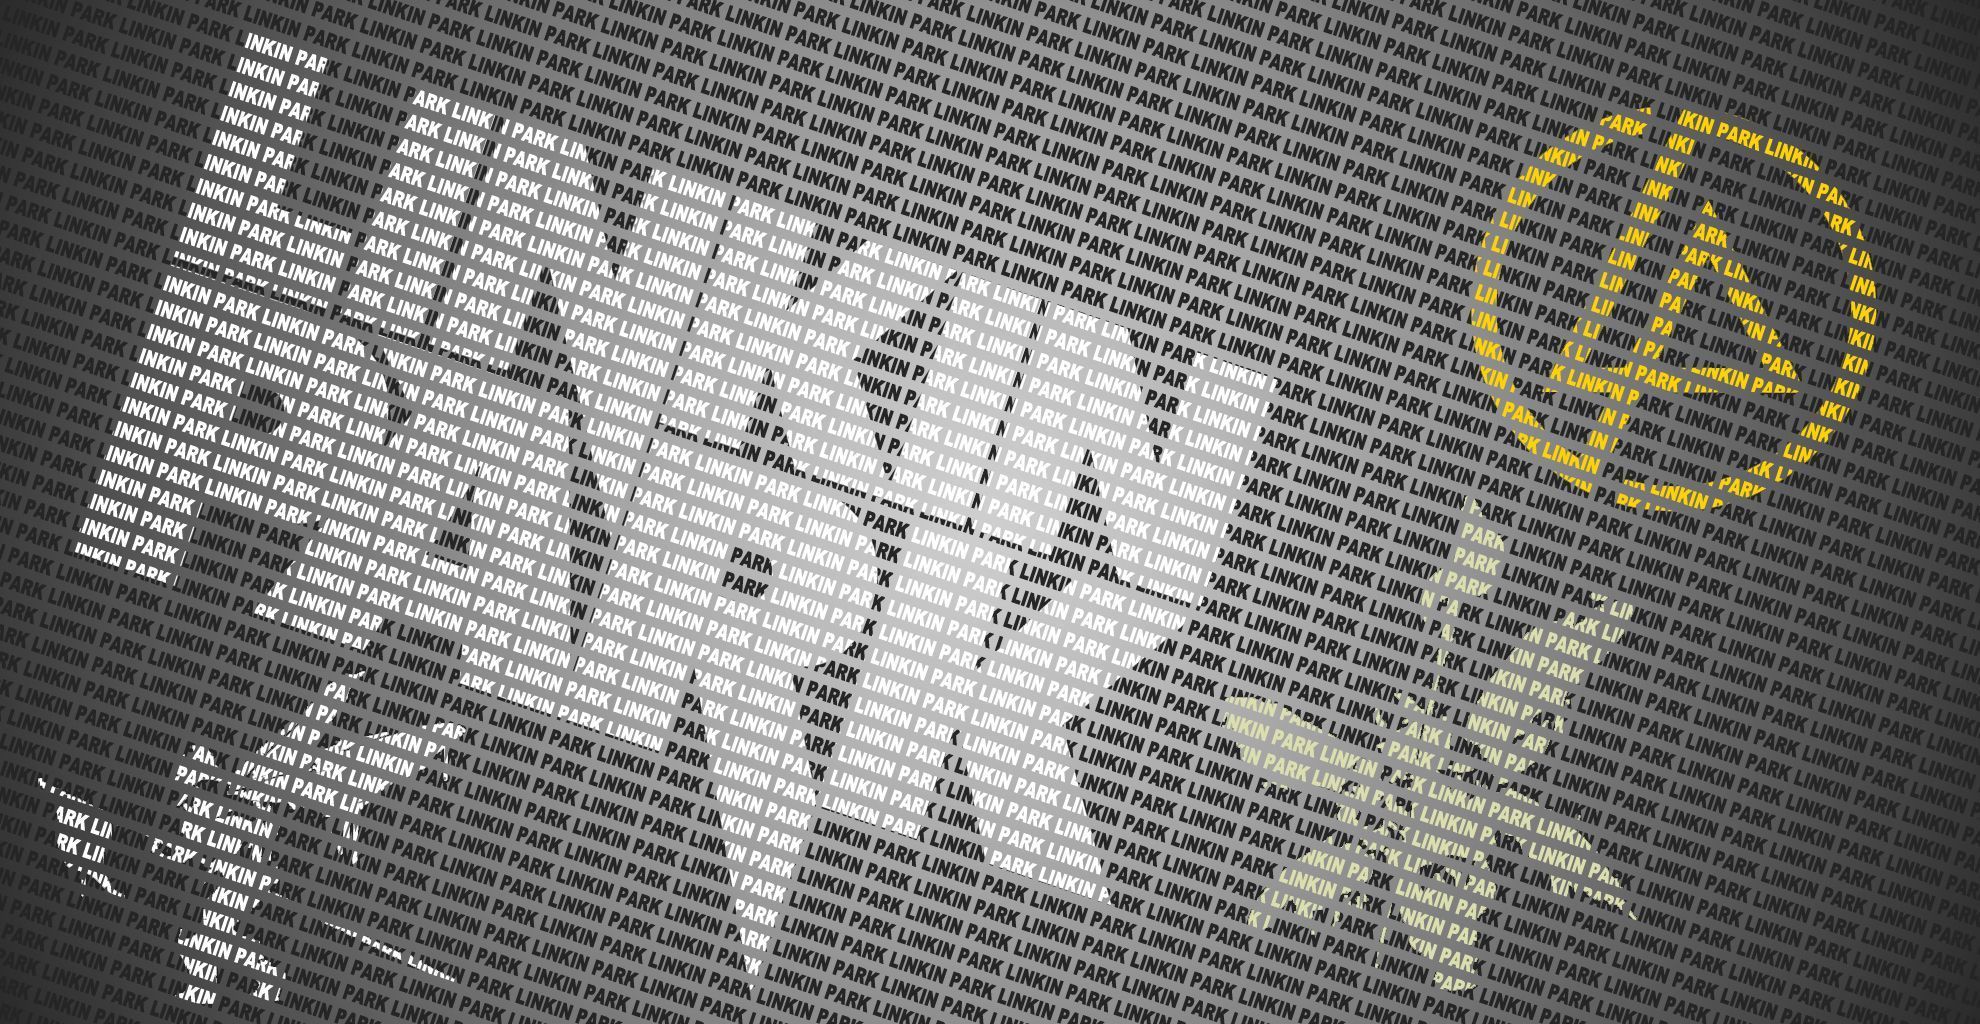 Linkin Park Text/Typography background by AMPgraphicart on DeviantArt